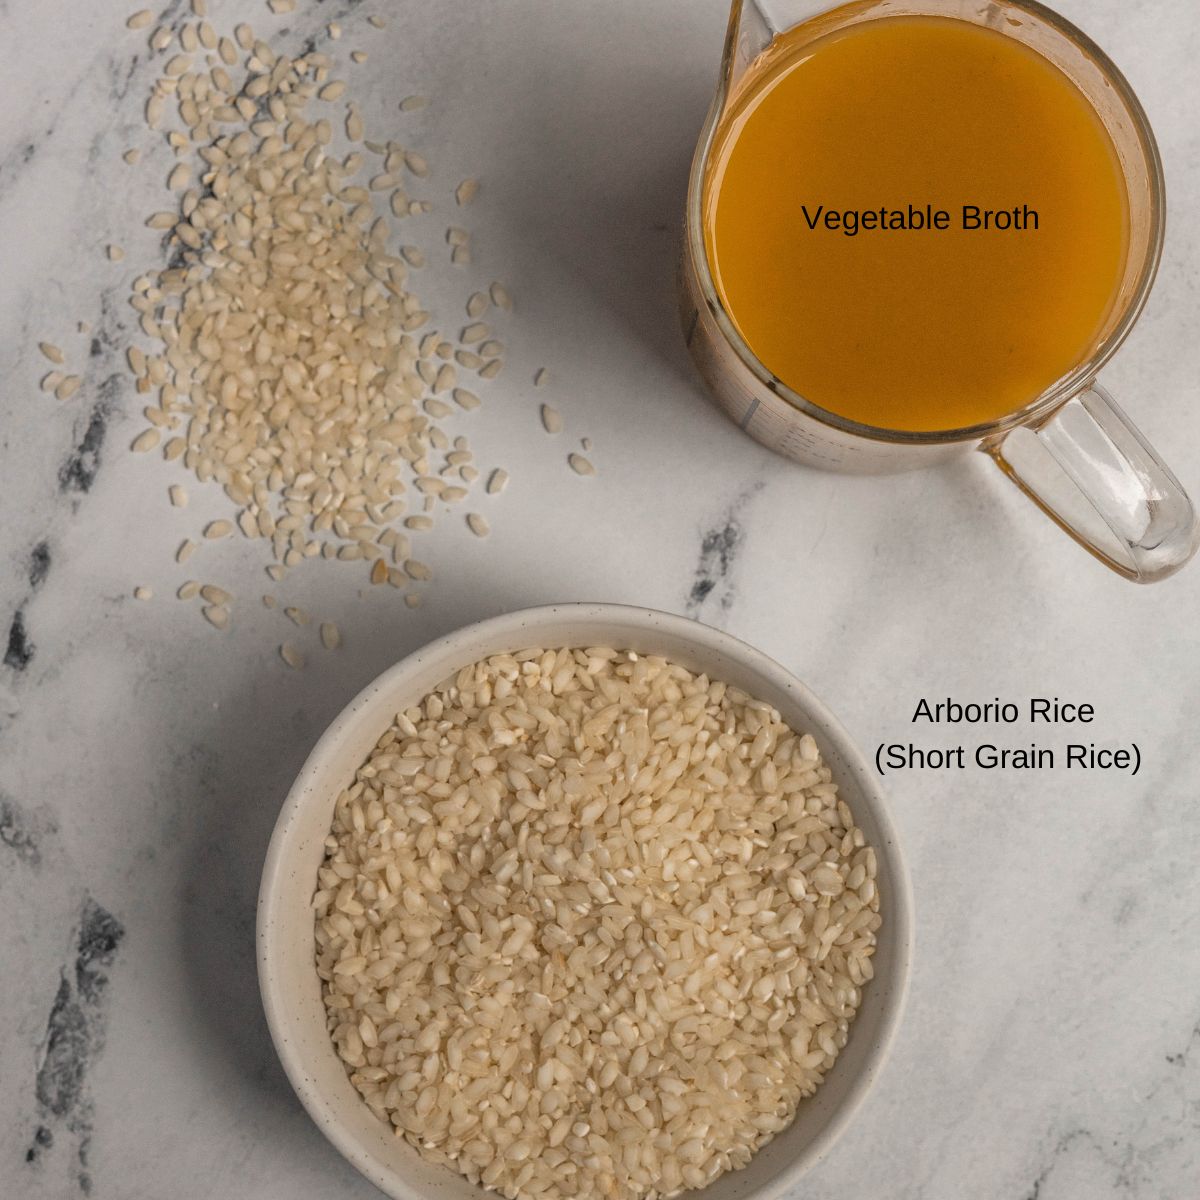 Ingredient image for Pumpkin and Mushroom Risotto. Shows uncooked risotto (short grain rice) and vegetable broth.